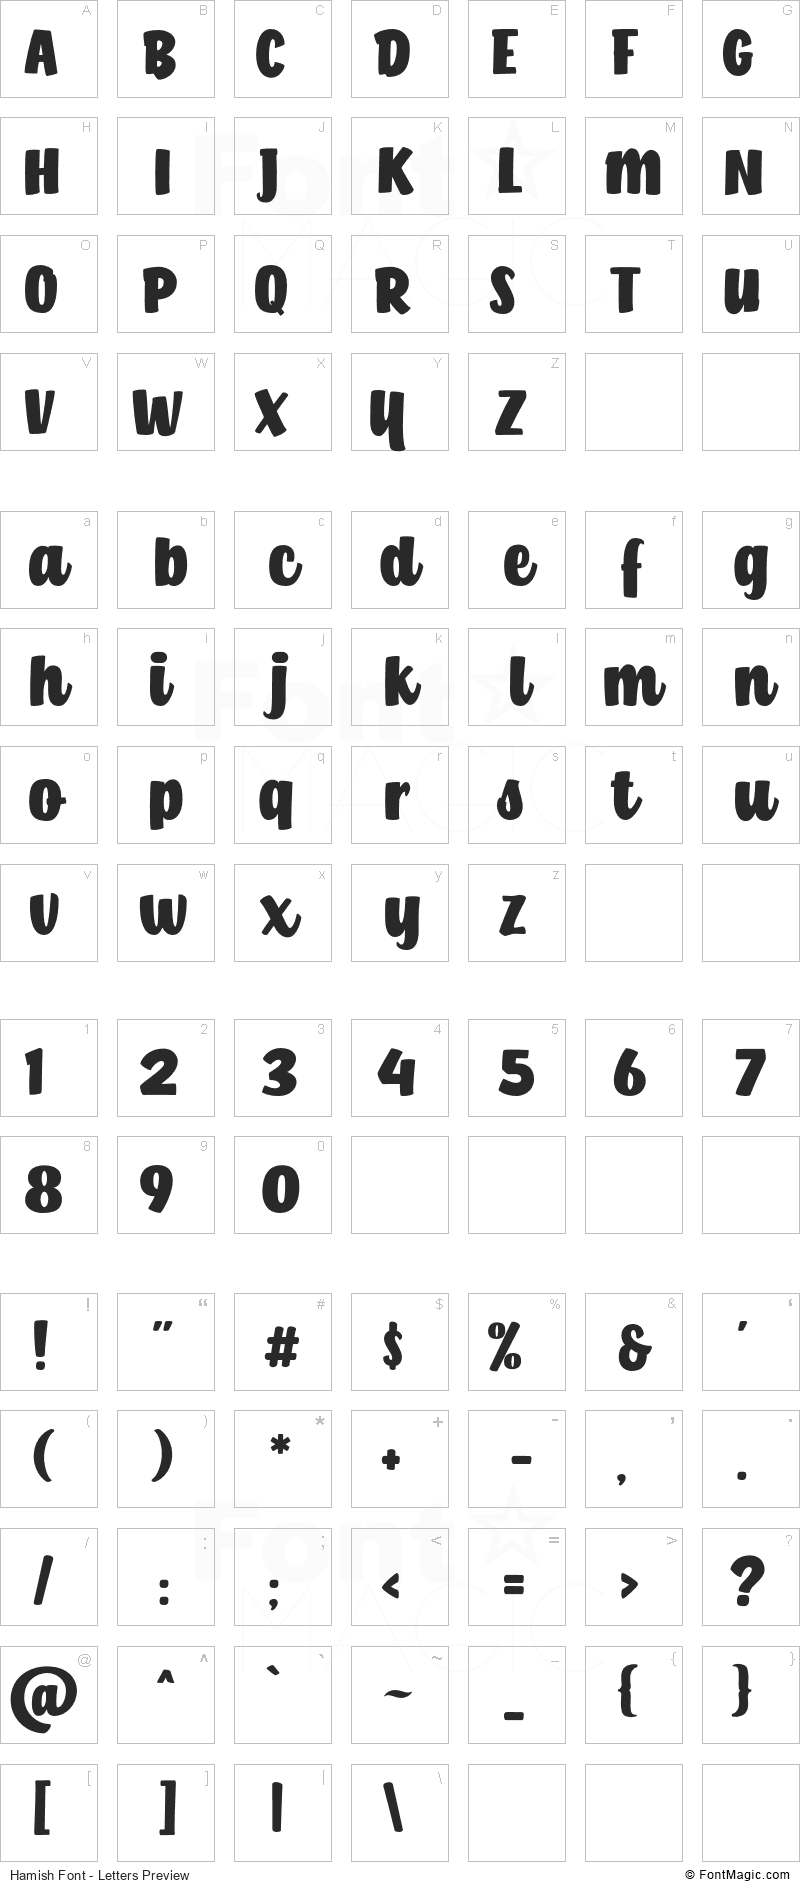 Hamish Font - All Latters Preview Chart